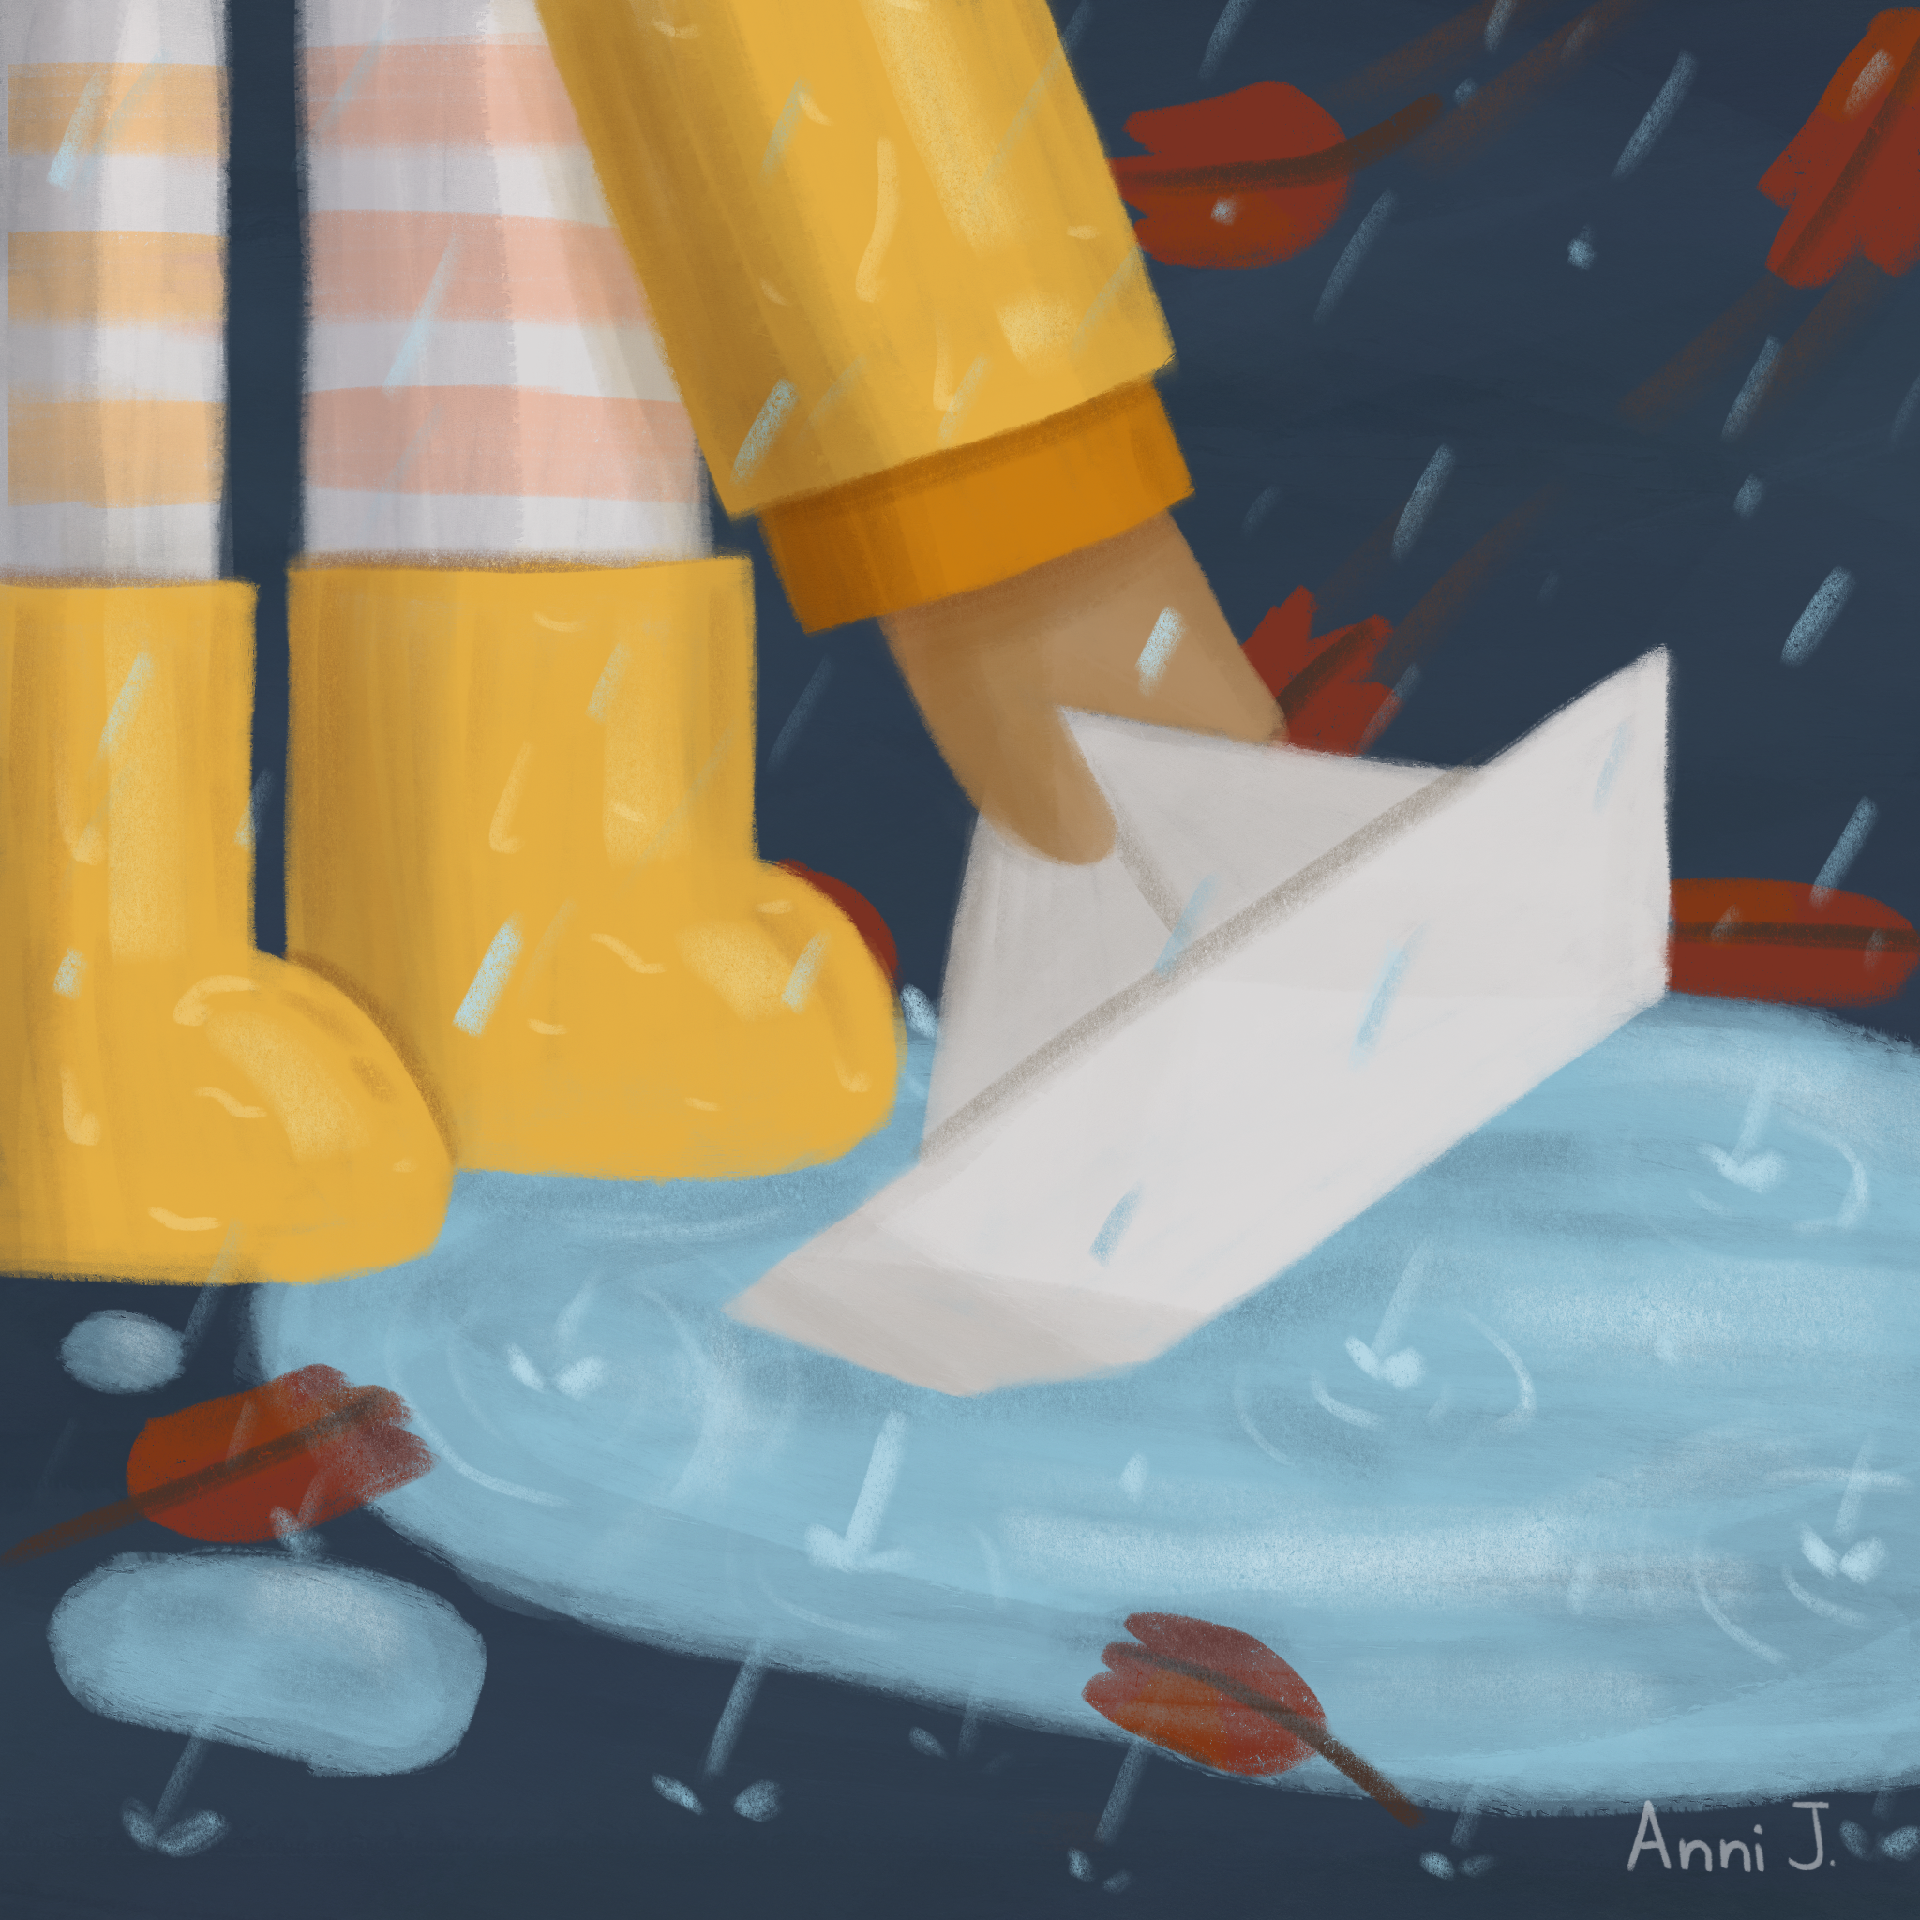 A cute children's book illustration in which you see yellow rain boots standing by a puddle surrounded by red autumn leaves. An arm reaches down from the top of the frame to put a white paper boat into the puddle. It is raining all around.